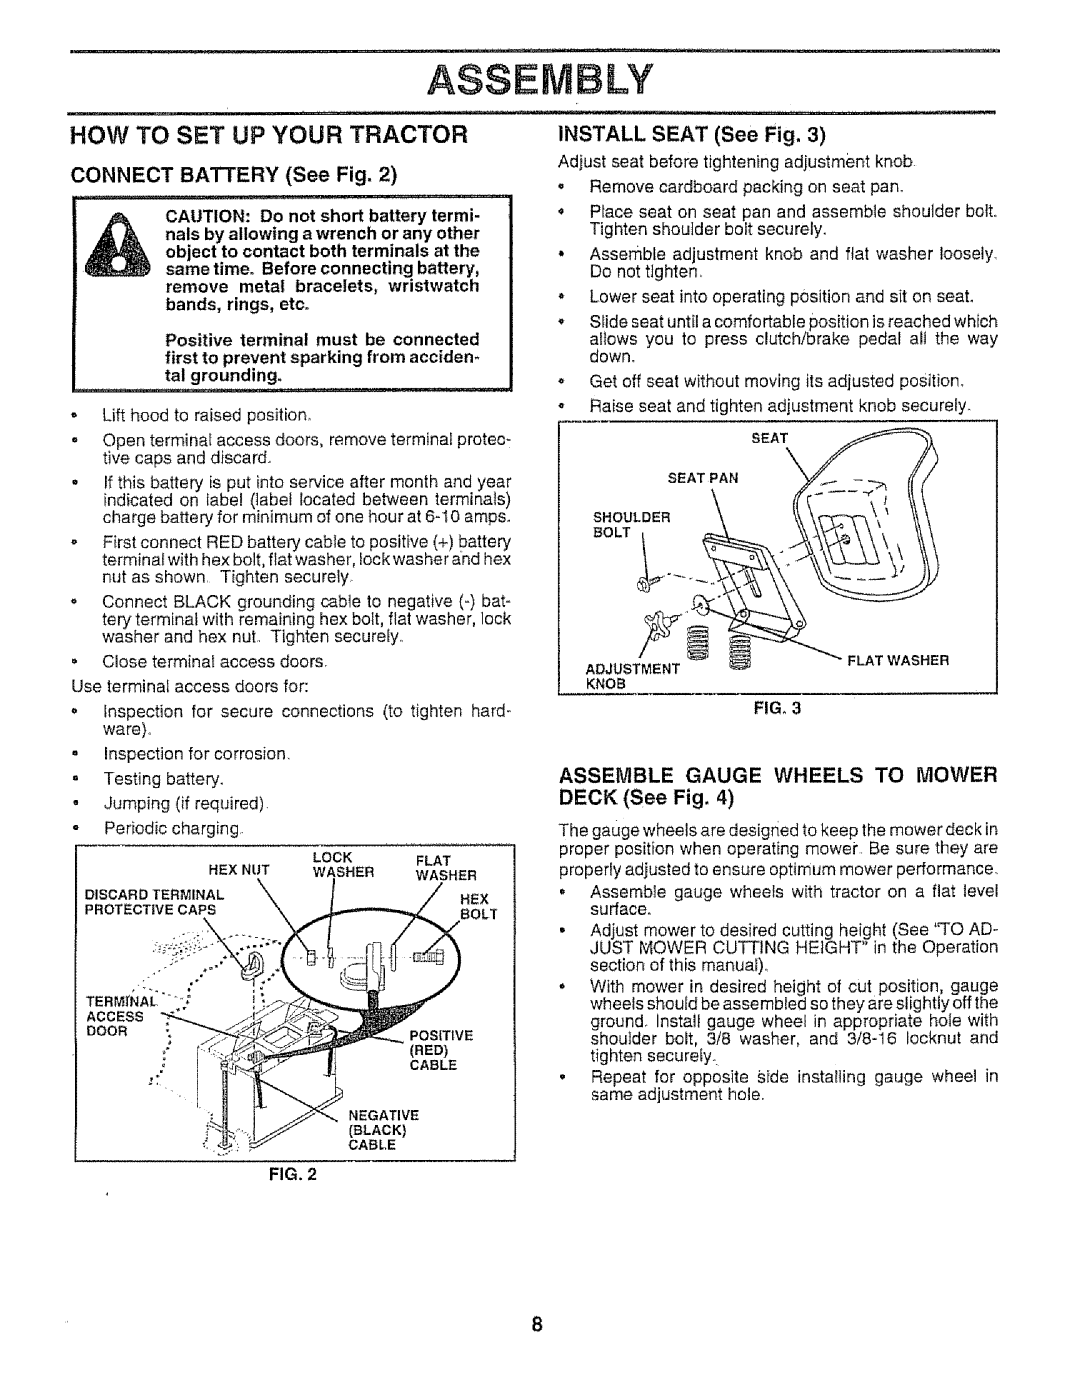 Craftsman 917.259592 owner manual Assembly, How To Set Up Your Tractor, INSTALL SEAT See Fig, CONNECT BATTERY See Fig 